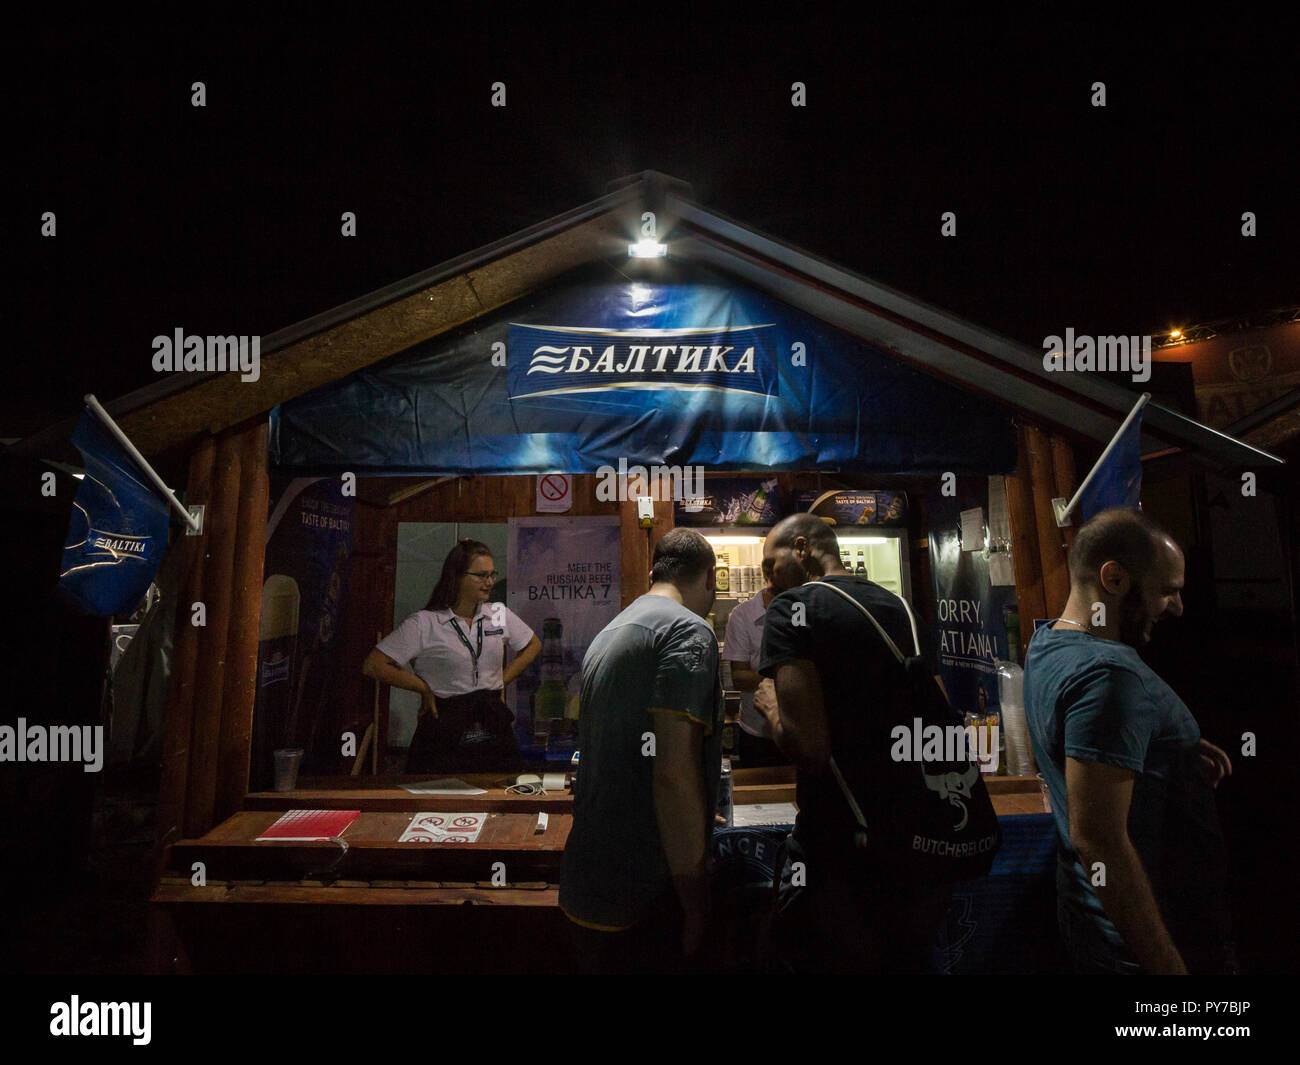 BELGRADE, SERBIA - AUGUST 18, 2018:  Baltika  logo on on a summer bar. Baltika is a lager, export style, brewed in Russia, and one of the symbols of R Stock Photo